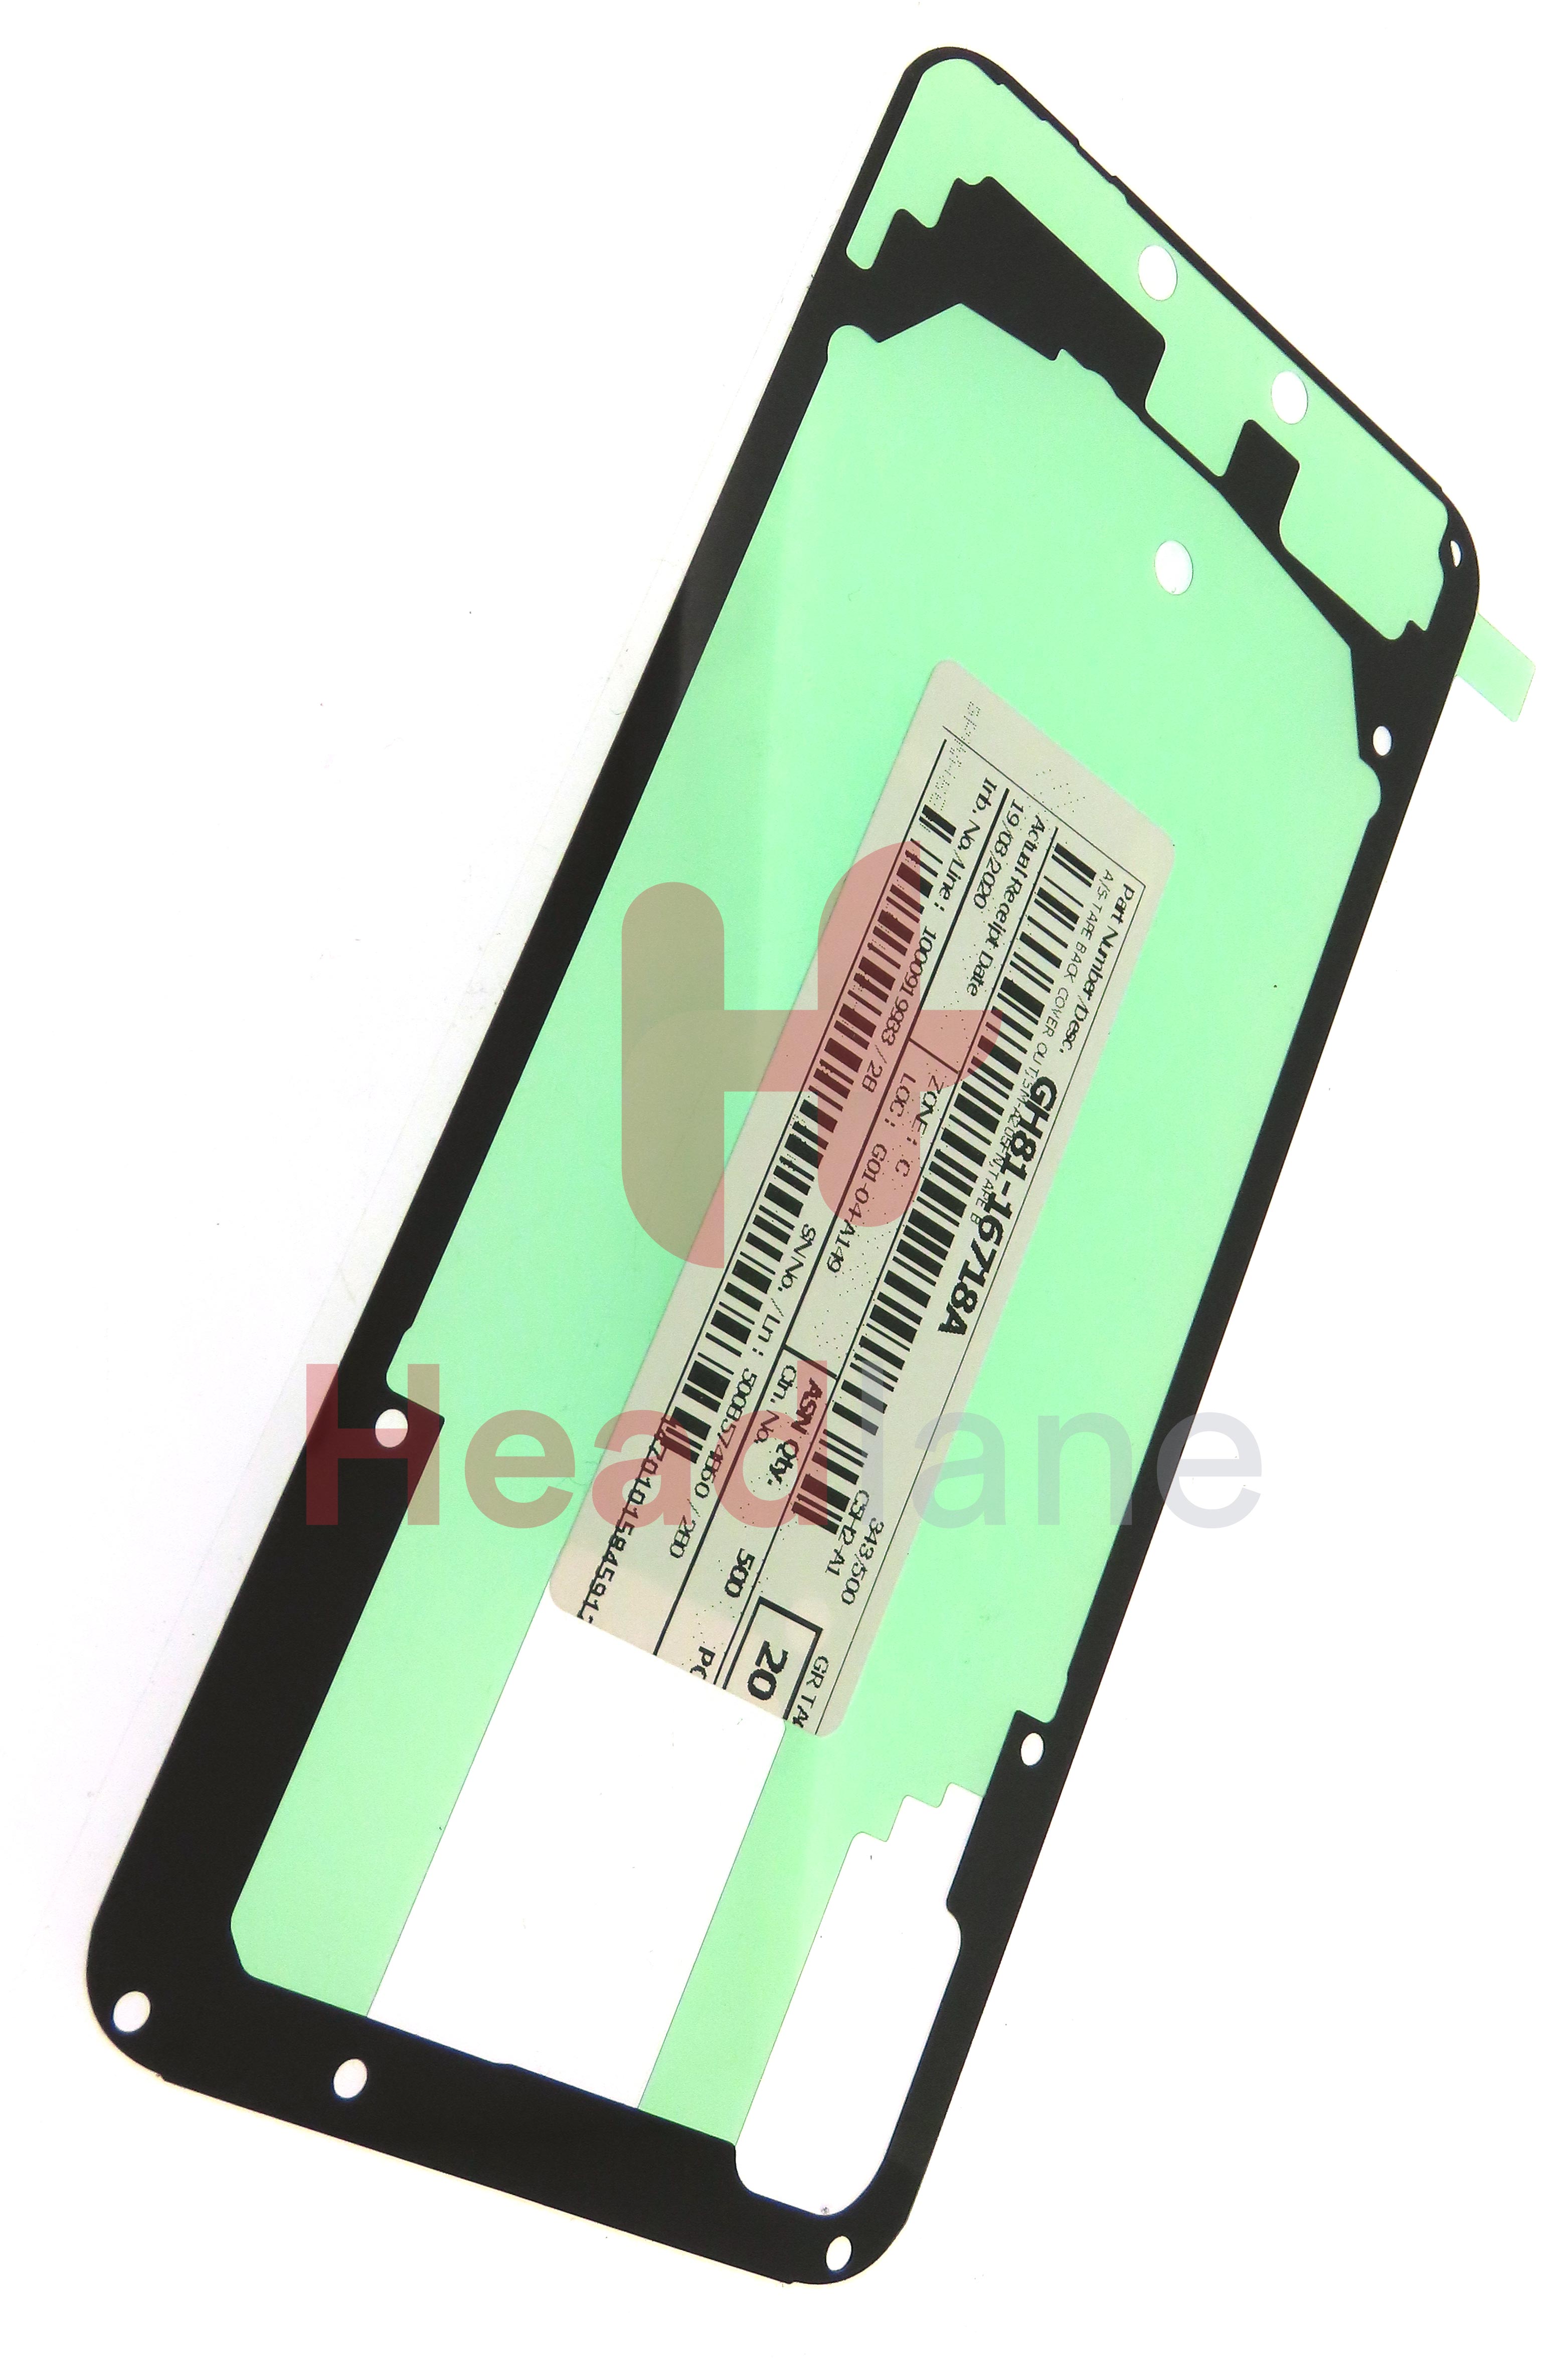 Samsung SM-A205 Galaxy A20 Back / Battery Cover Adhesive / Sticker